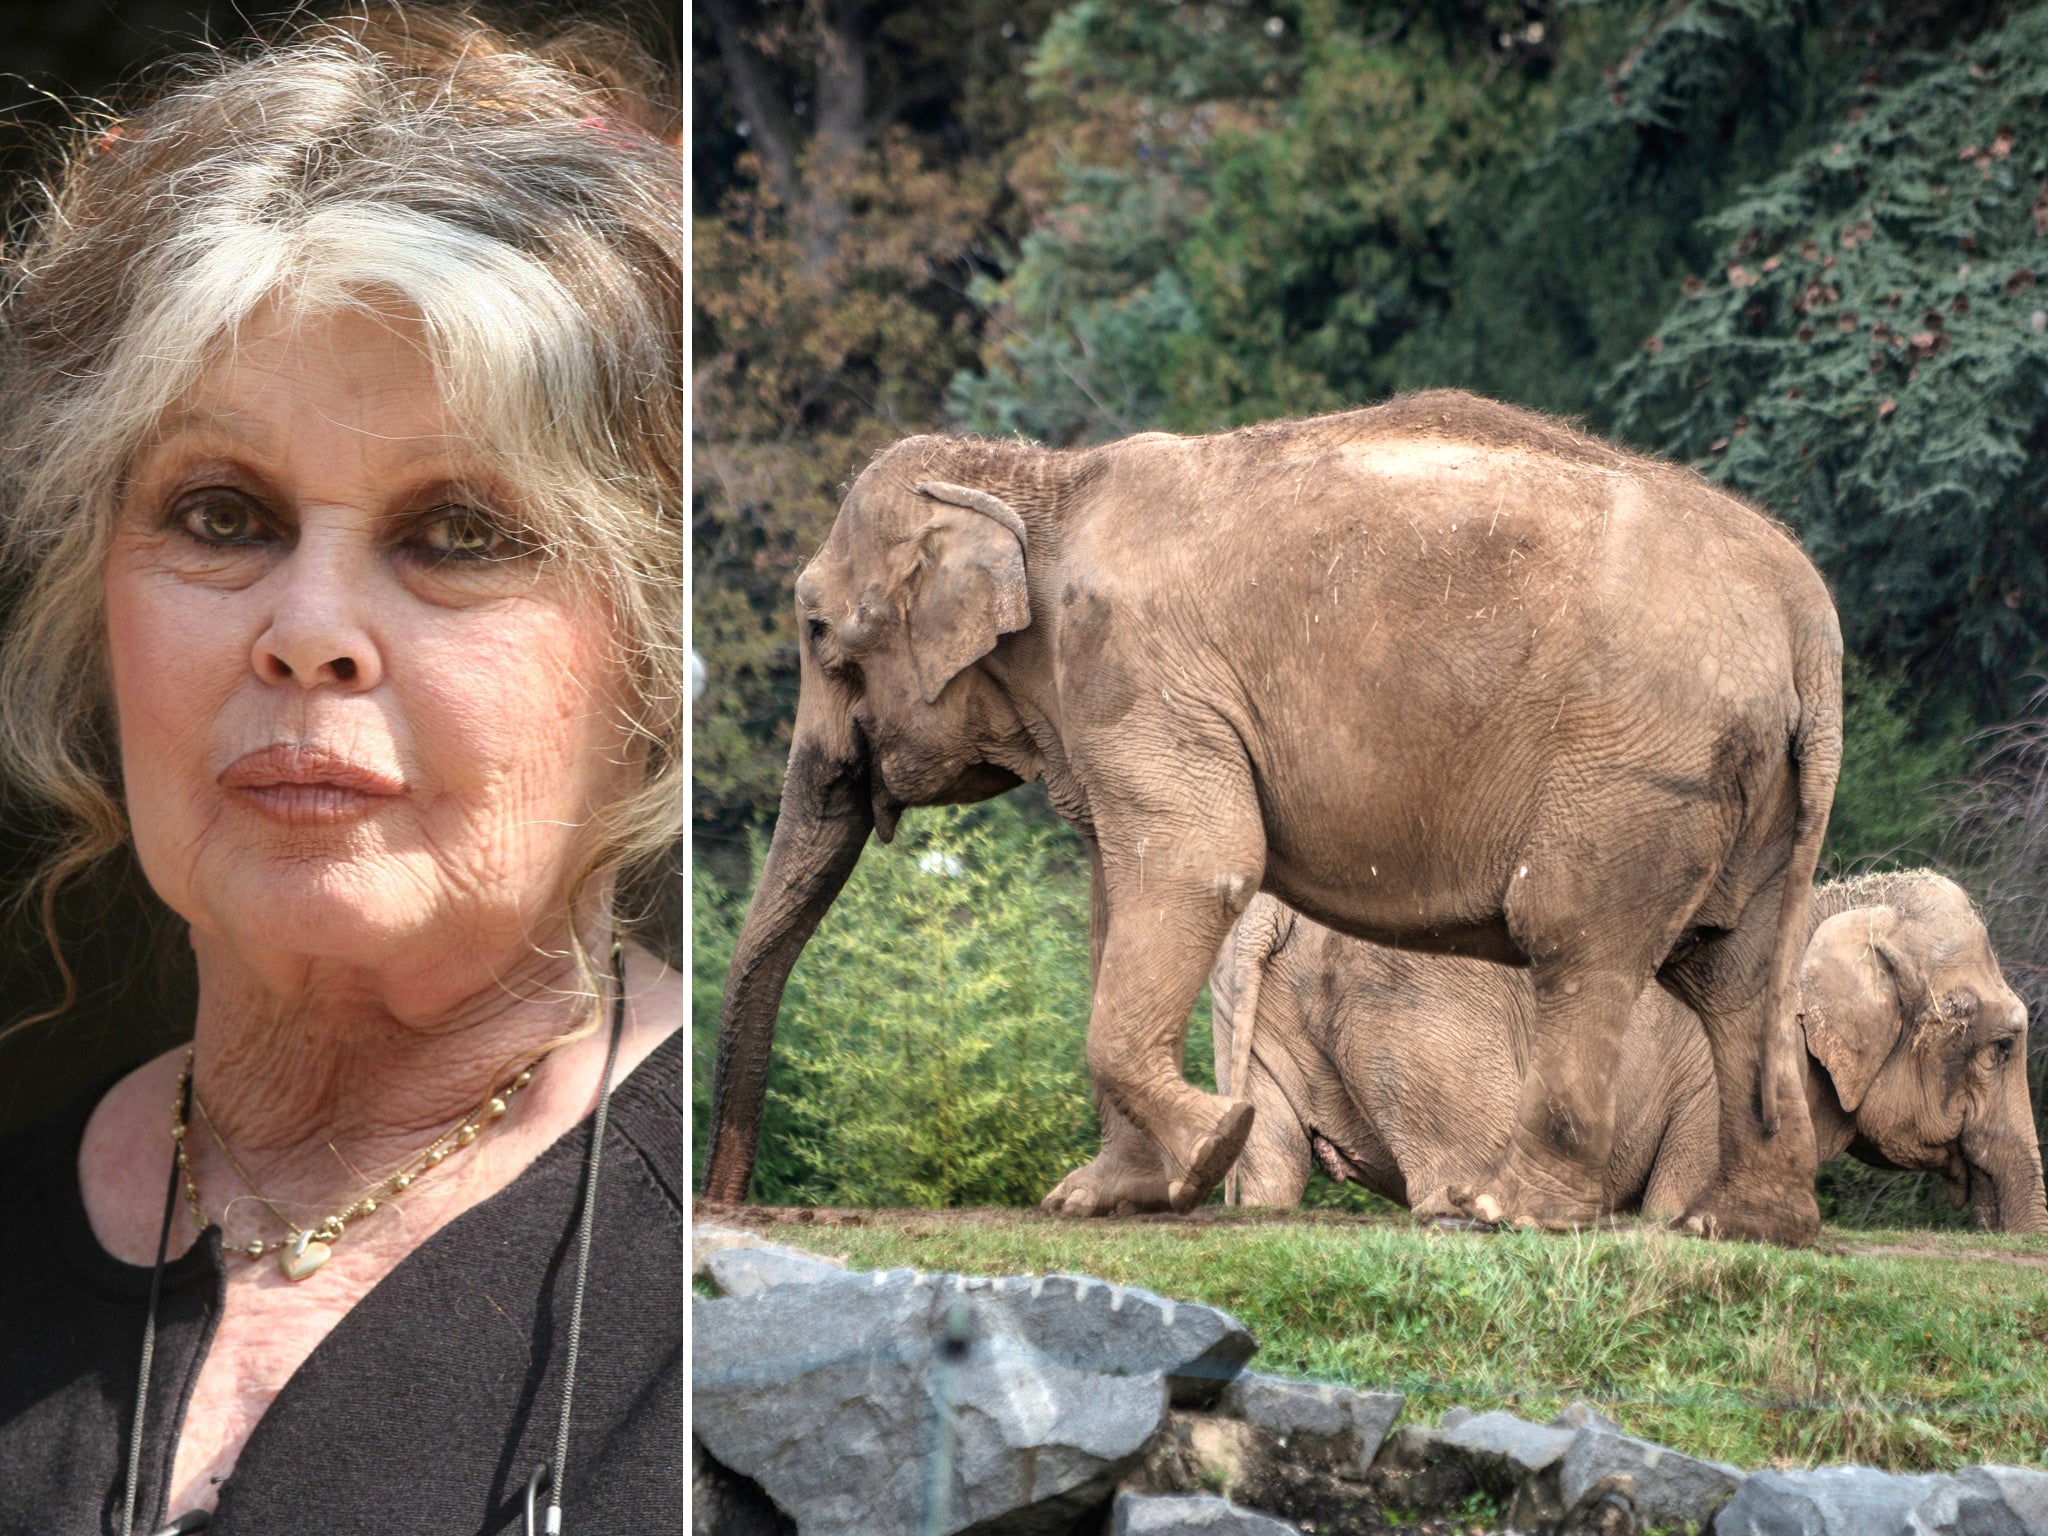 Former actress Brigitte Bardot is threatening to leave France over the treatment of Baby and Nepal, pictured right, two elephants suffering from tuberculosis at Lyon zoo